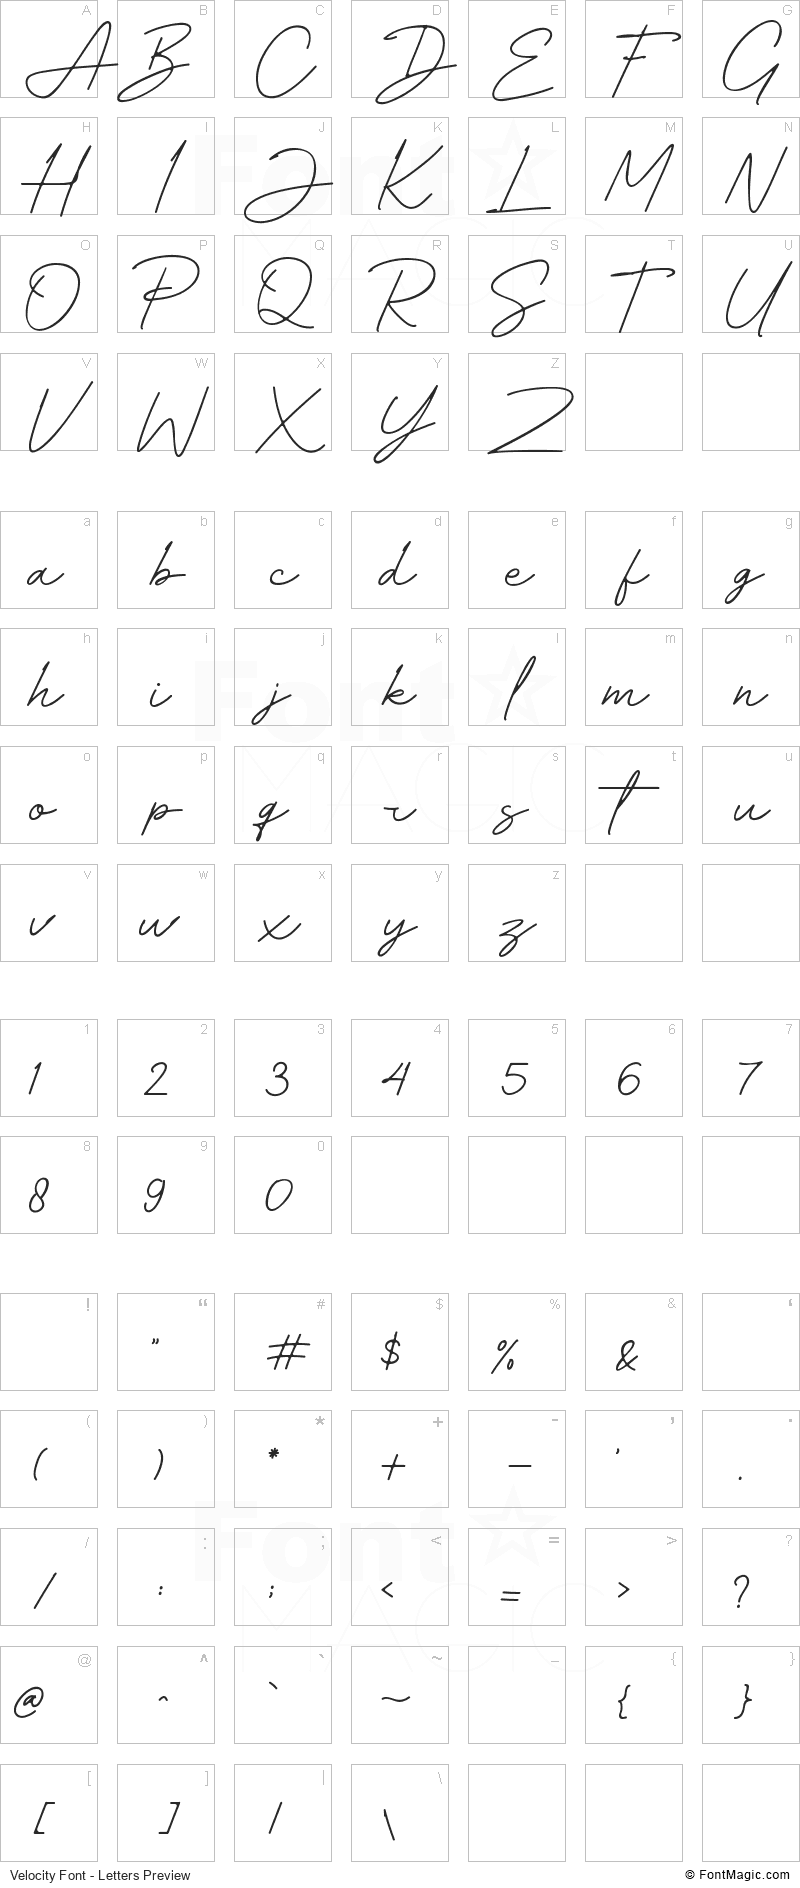 Velocity Font - All Latters Preview Chart